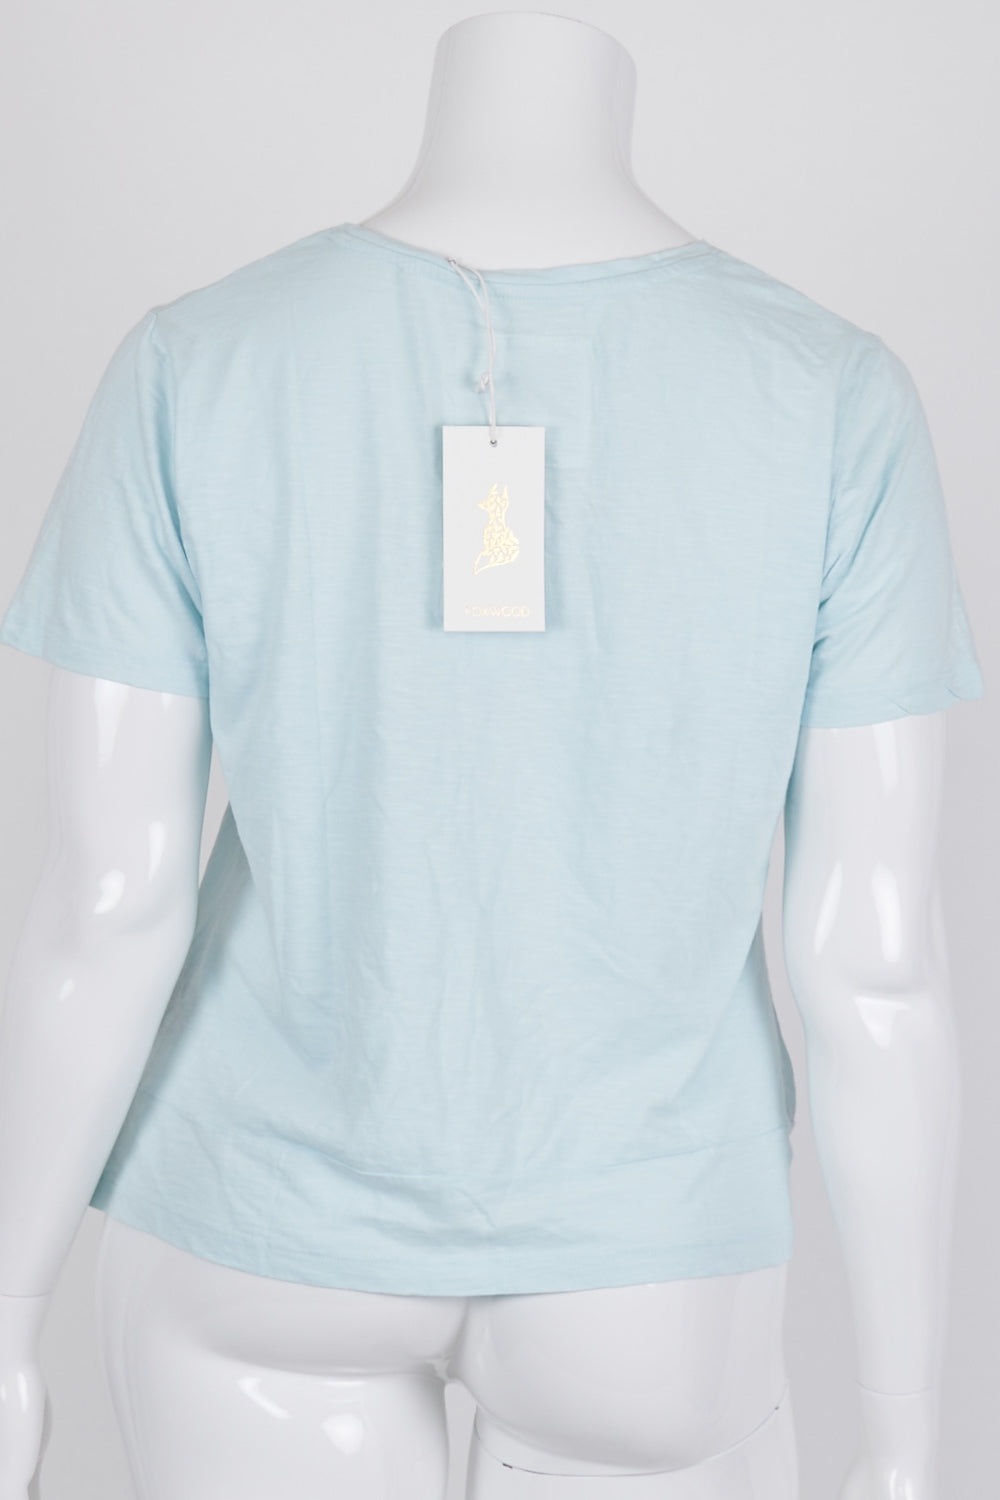 Foxwood Blue Knot Front Crop Tee 14